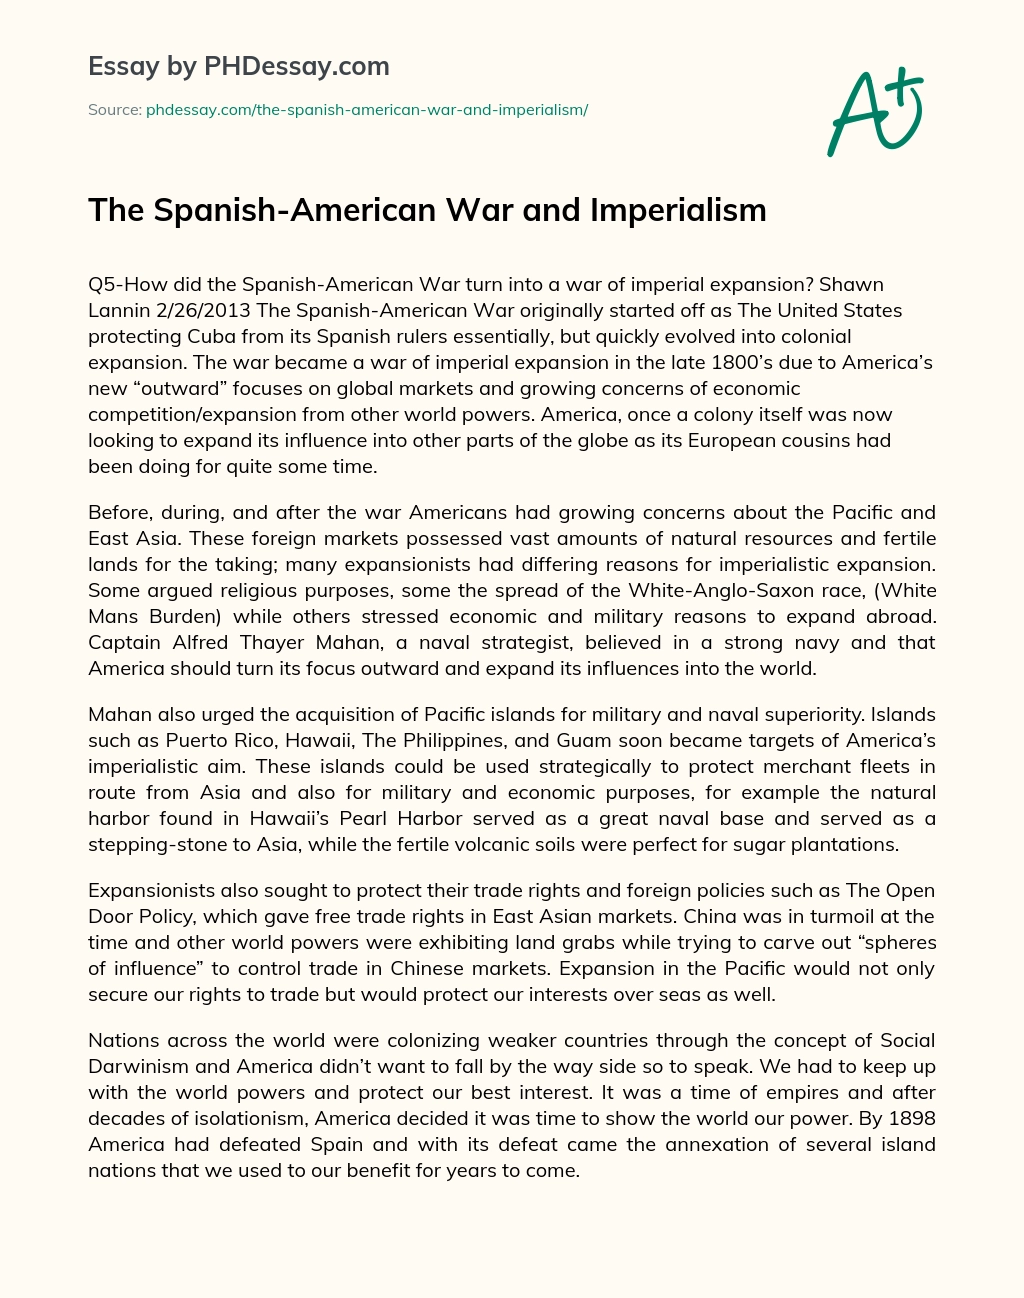 The Spanish-American War and Imperialism essay